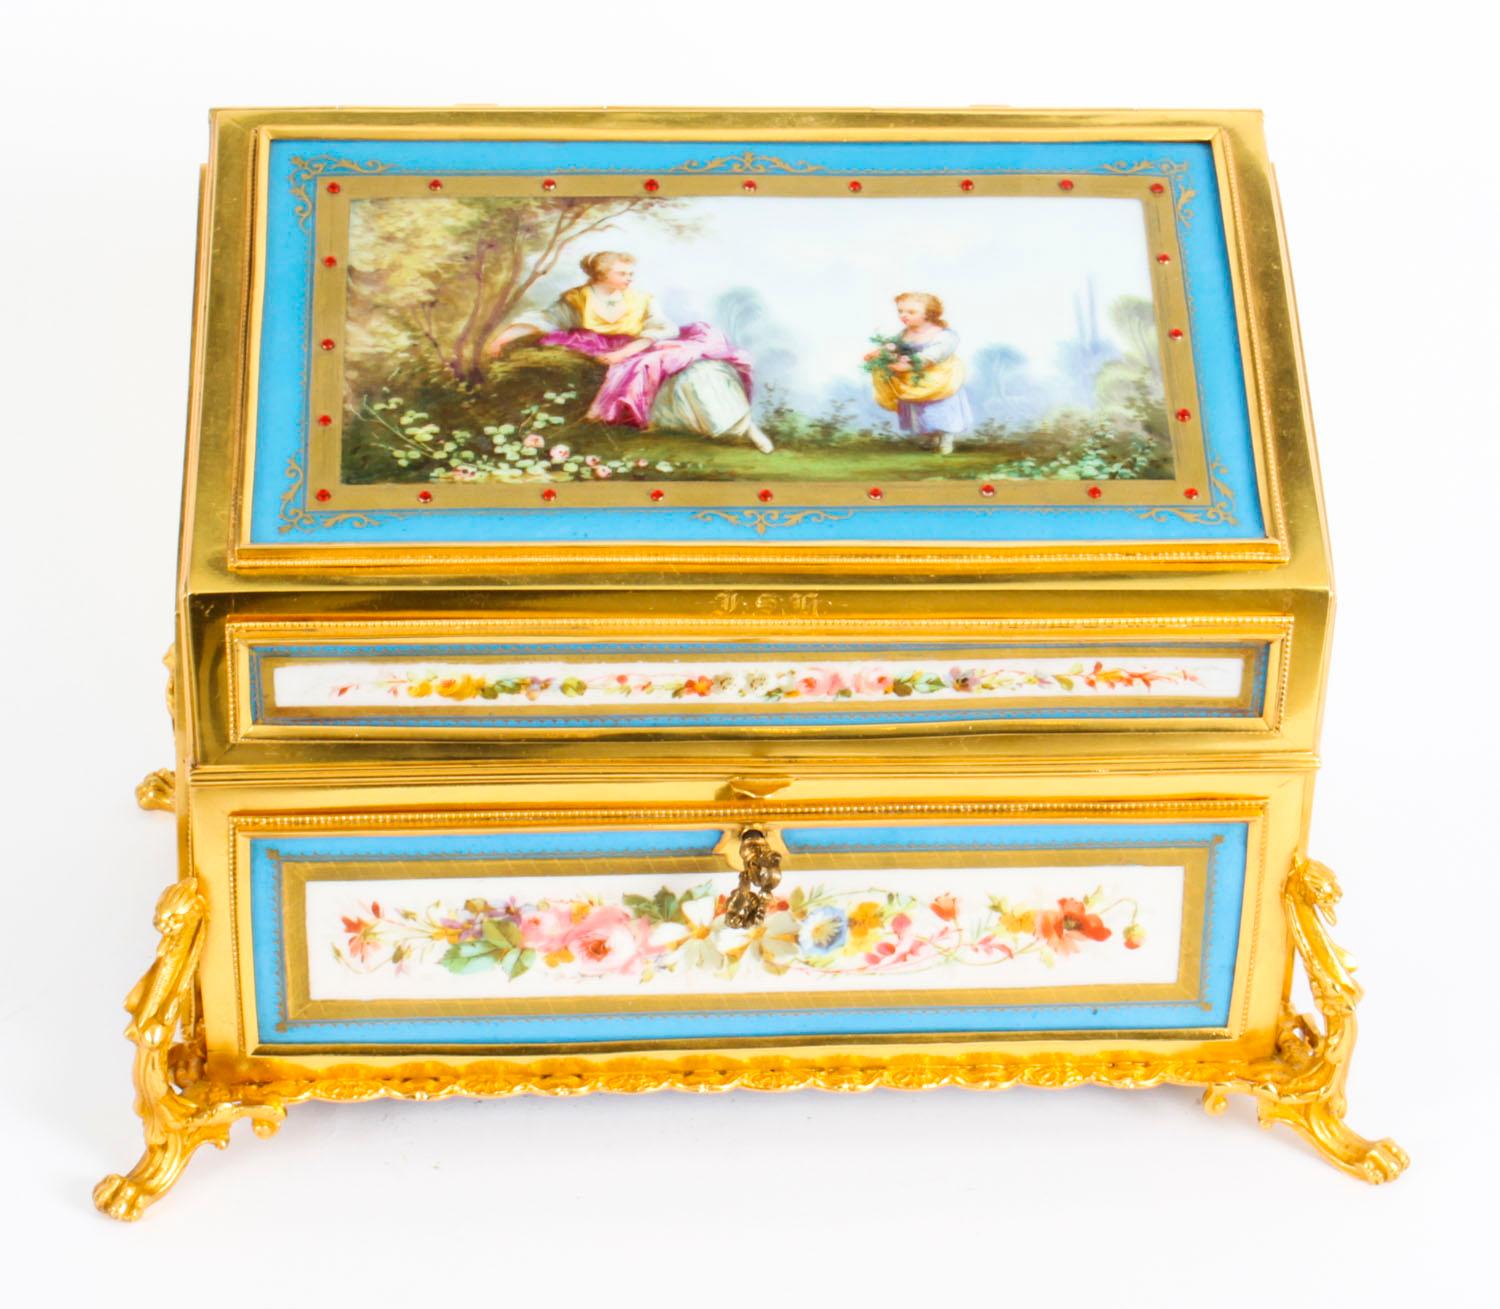 This is an absolutely fabulous antique French Ormolu and Sèvres Porcelain desktop correspondence casket, circa 1870 in date.

Of rectangular form, the front top and sides feature beautiful parcel gilt heightened and jeweled Sèvres Porcelain panels